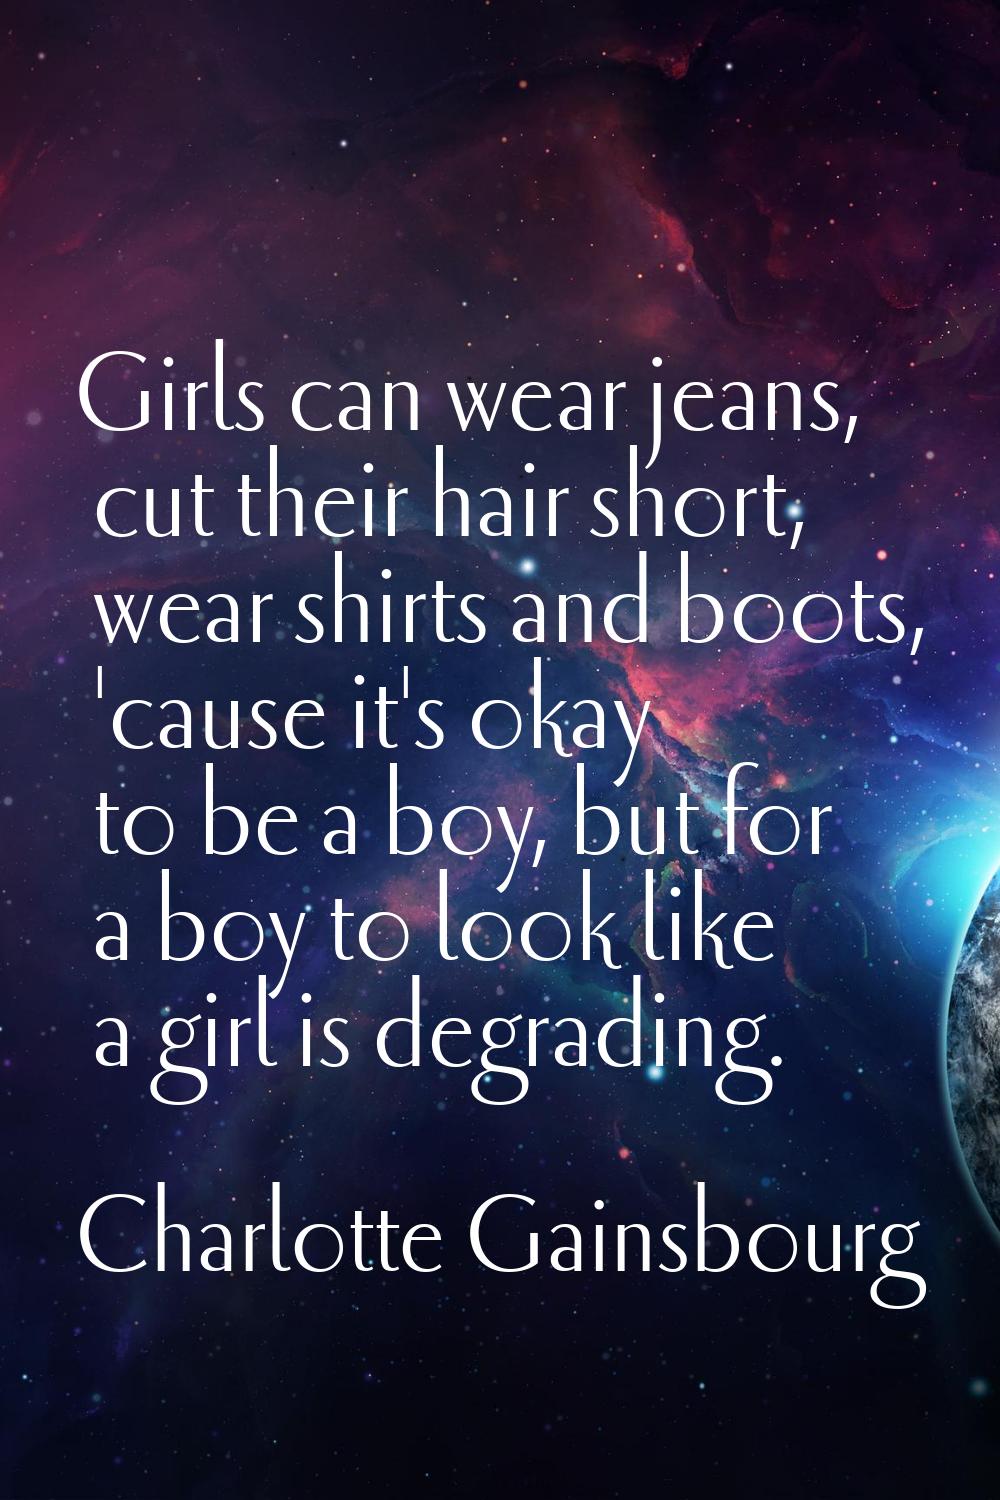 Girls can wear jeans, cut their hair short, wear shirts and boots, 'cause it's okay to be a boy, bu